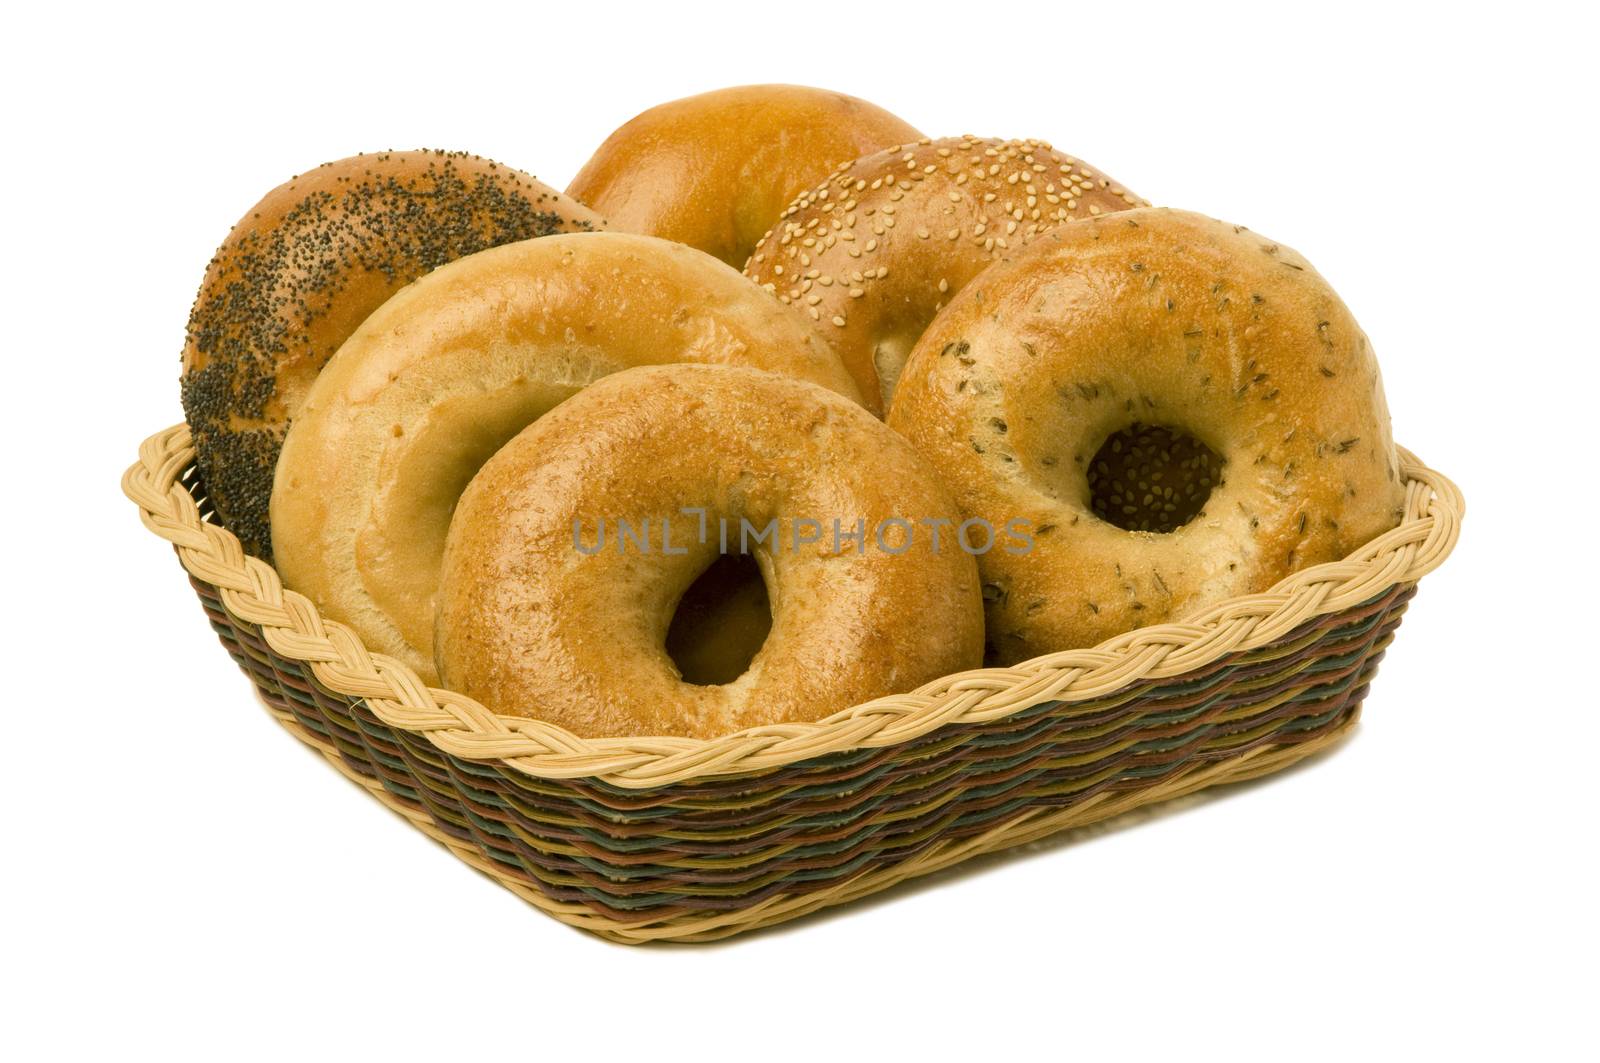 A variety of six bagels in a basket, isolated against white background